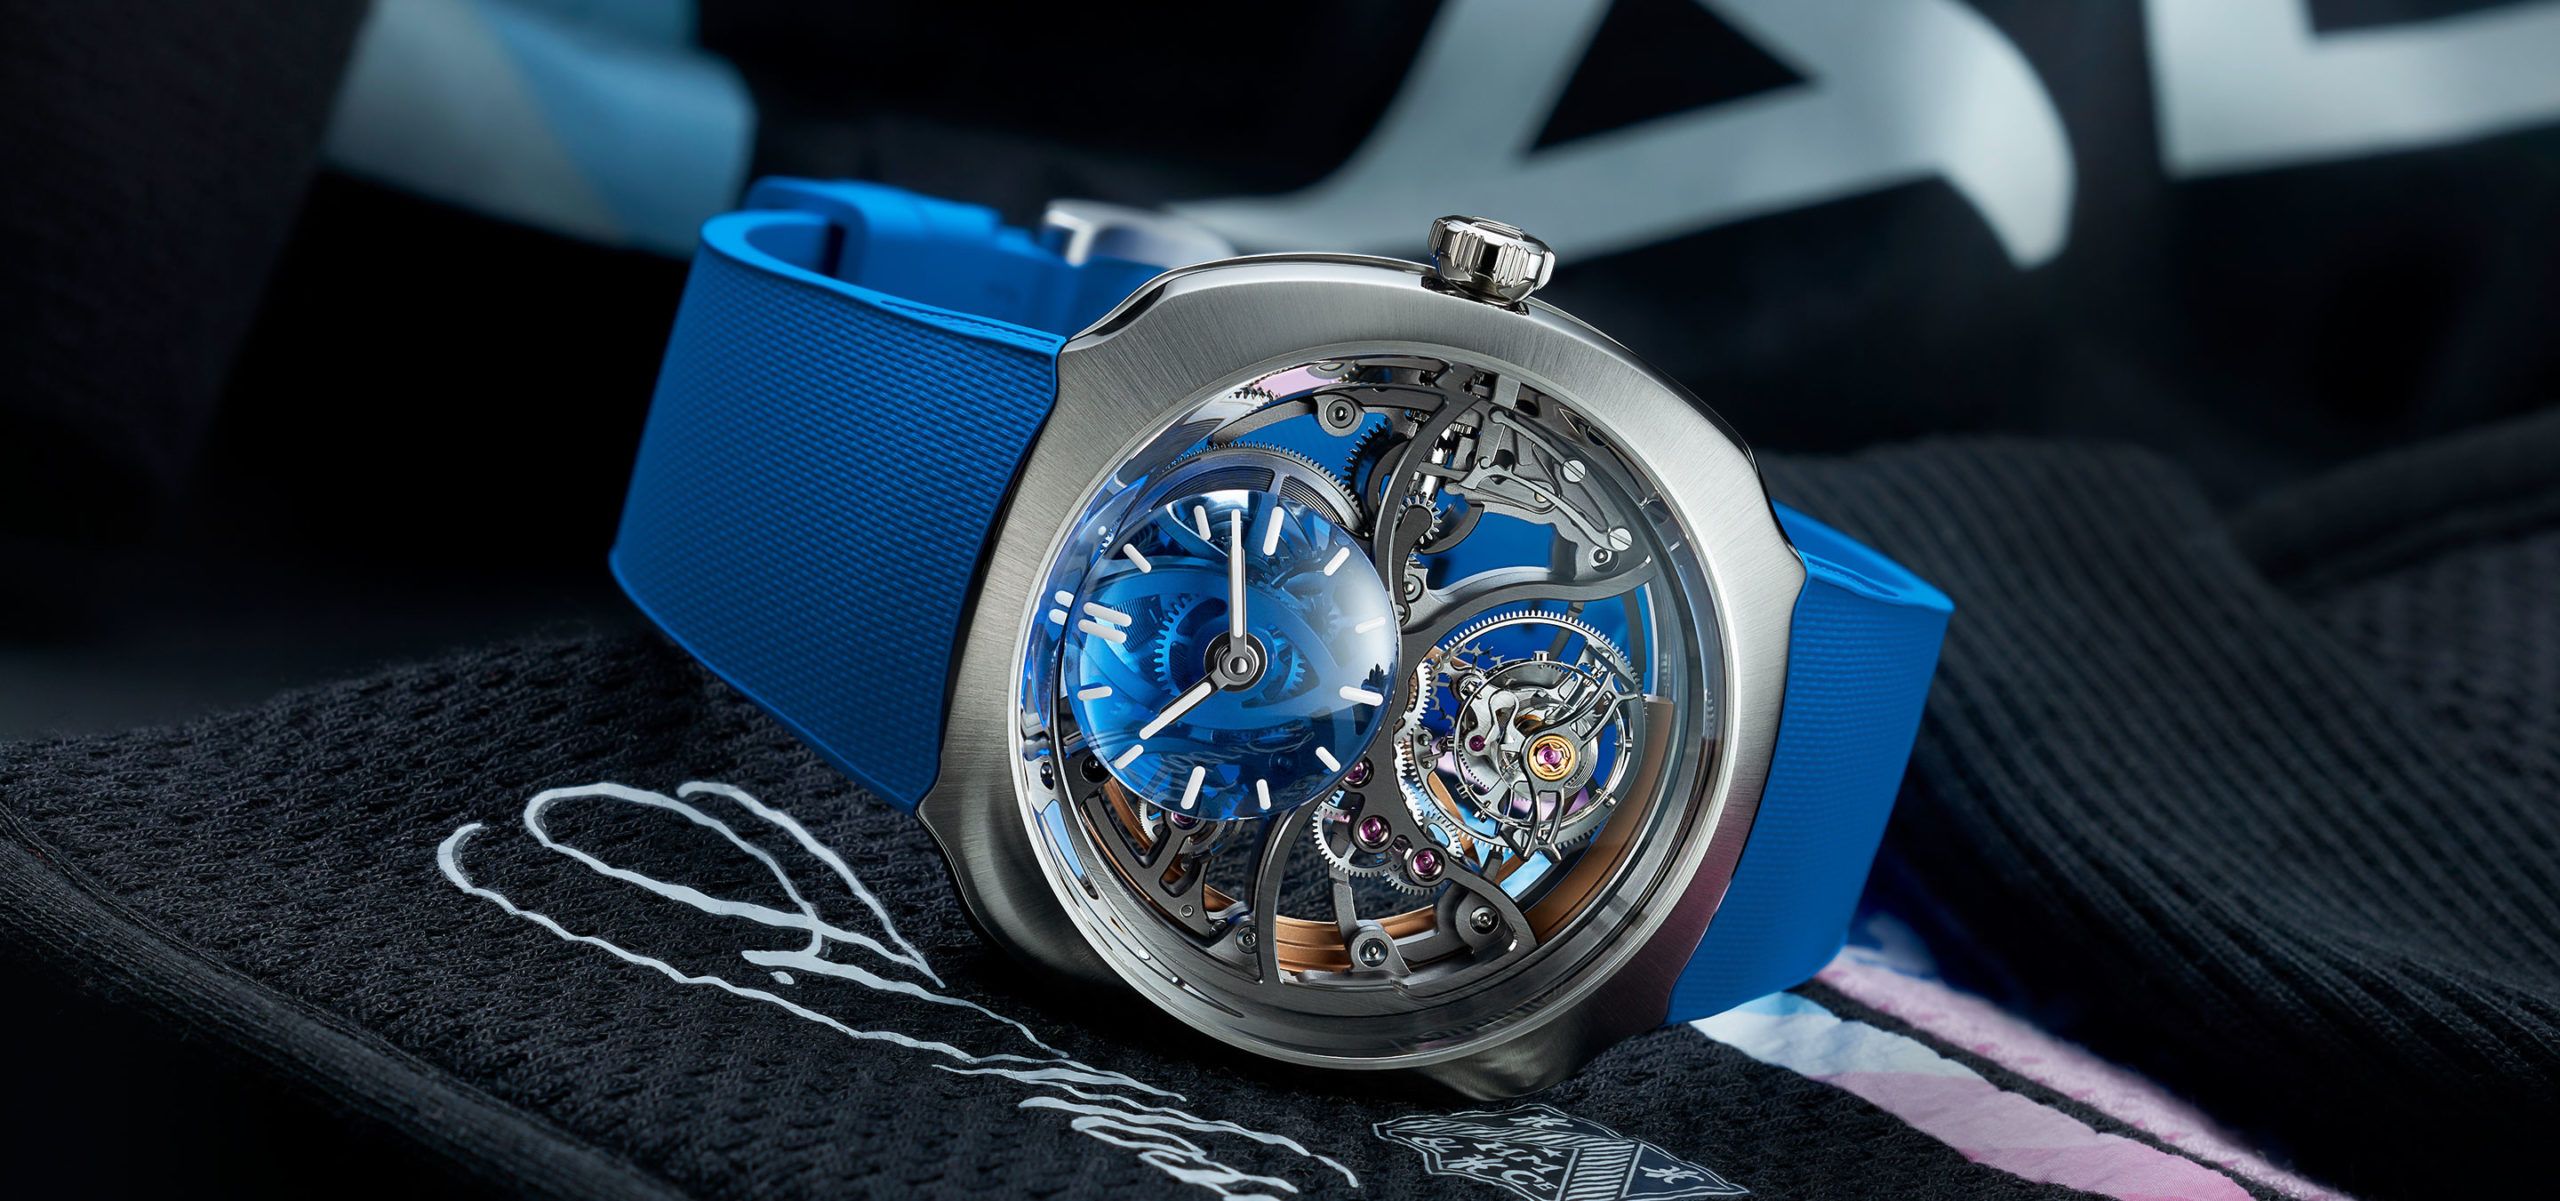 Introducing The H. Moser & Cie. Streamliner Cylindrical Tourbillon Skeleton Alpine Limited Edition Timepiece